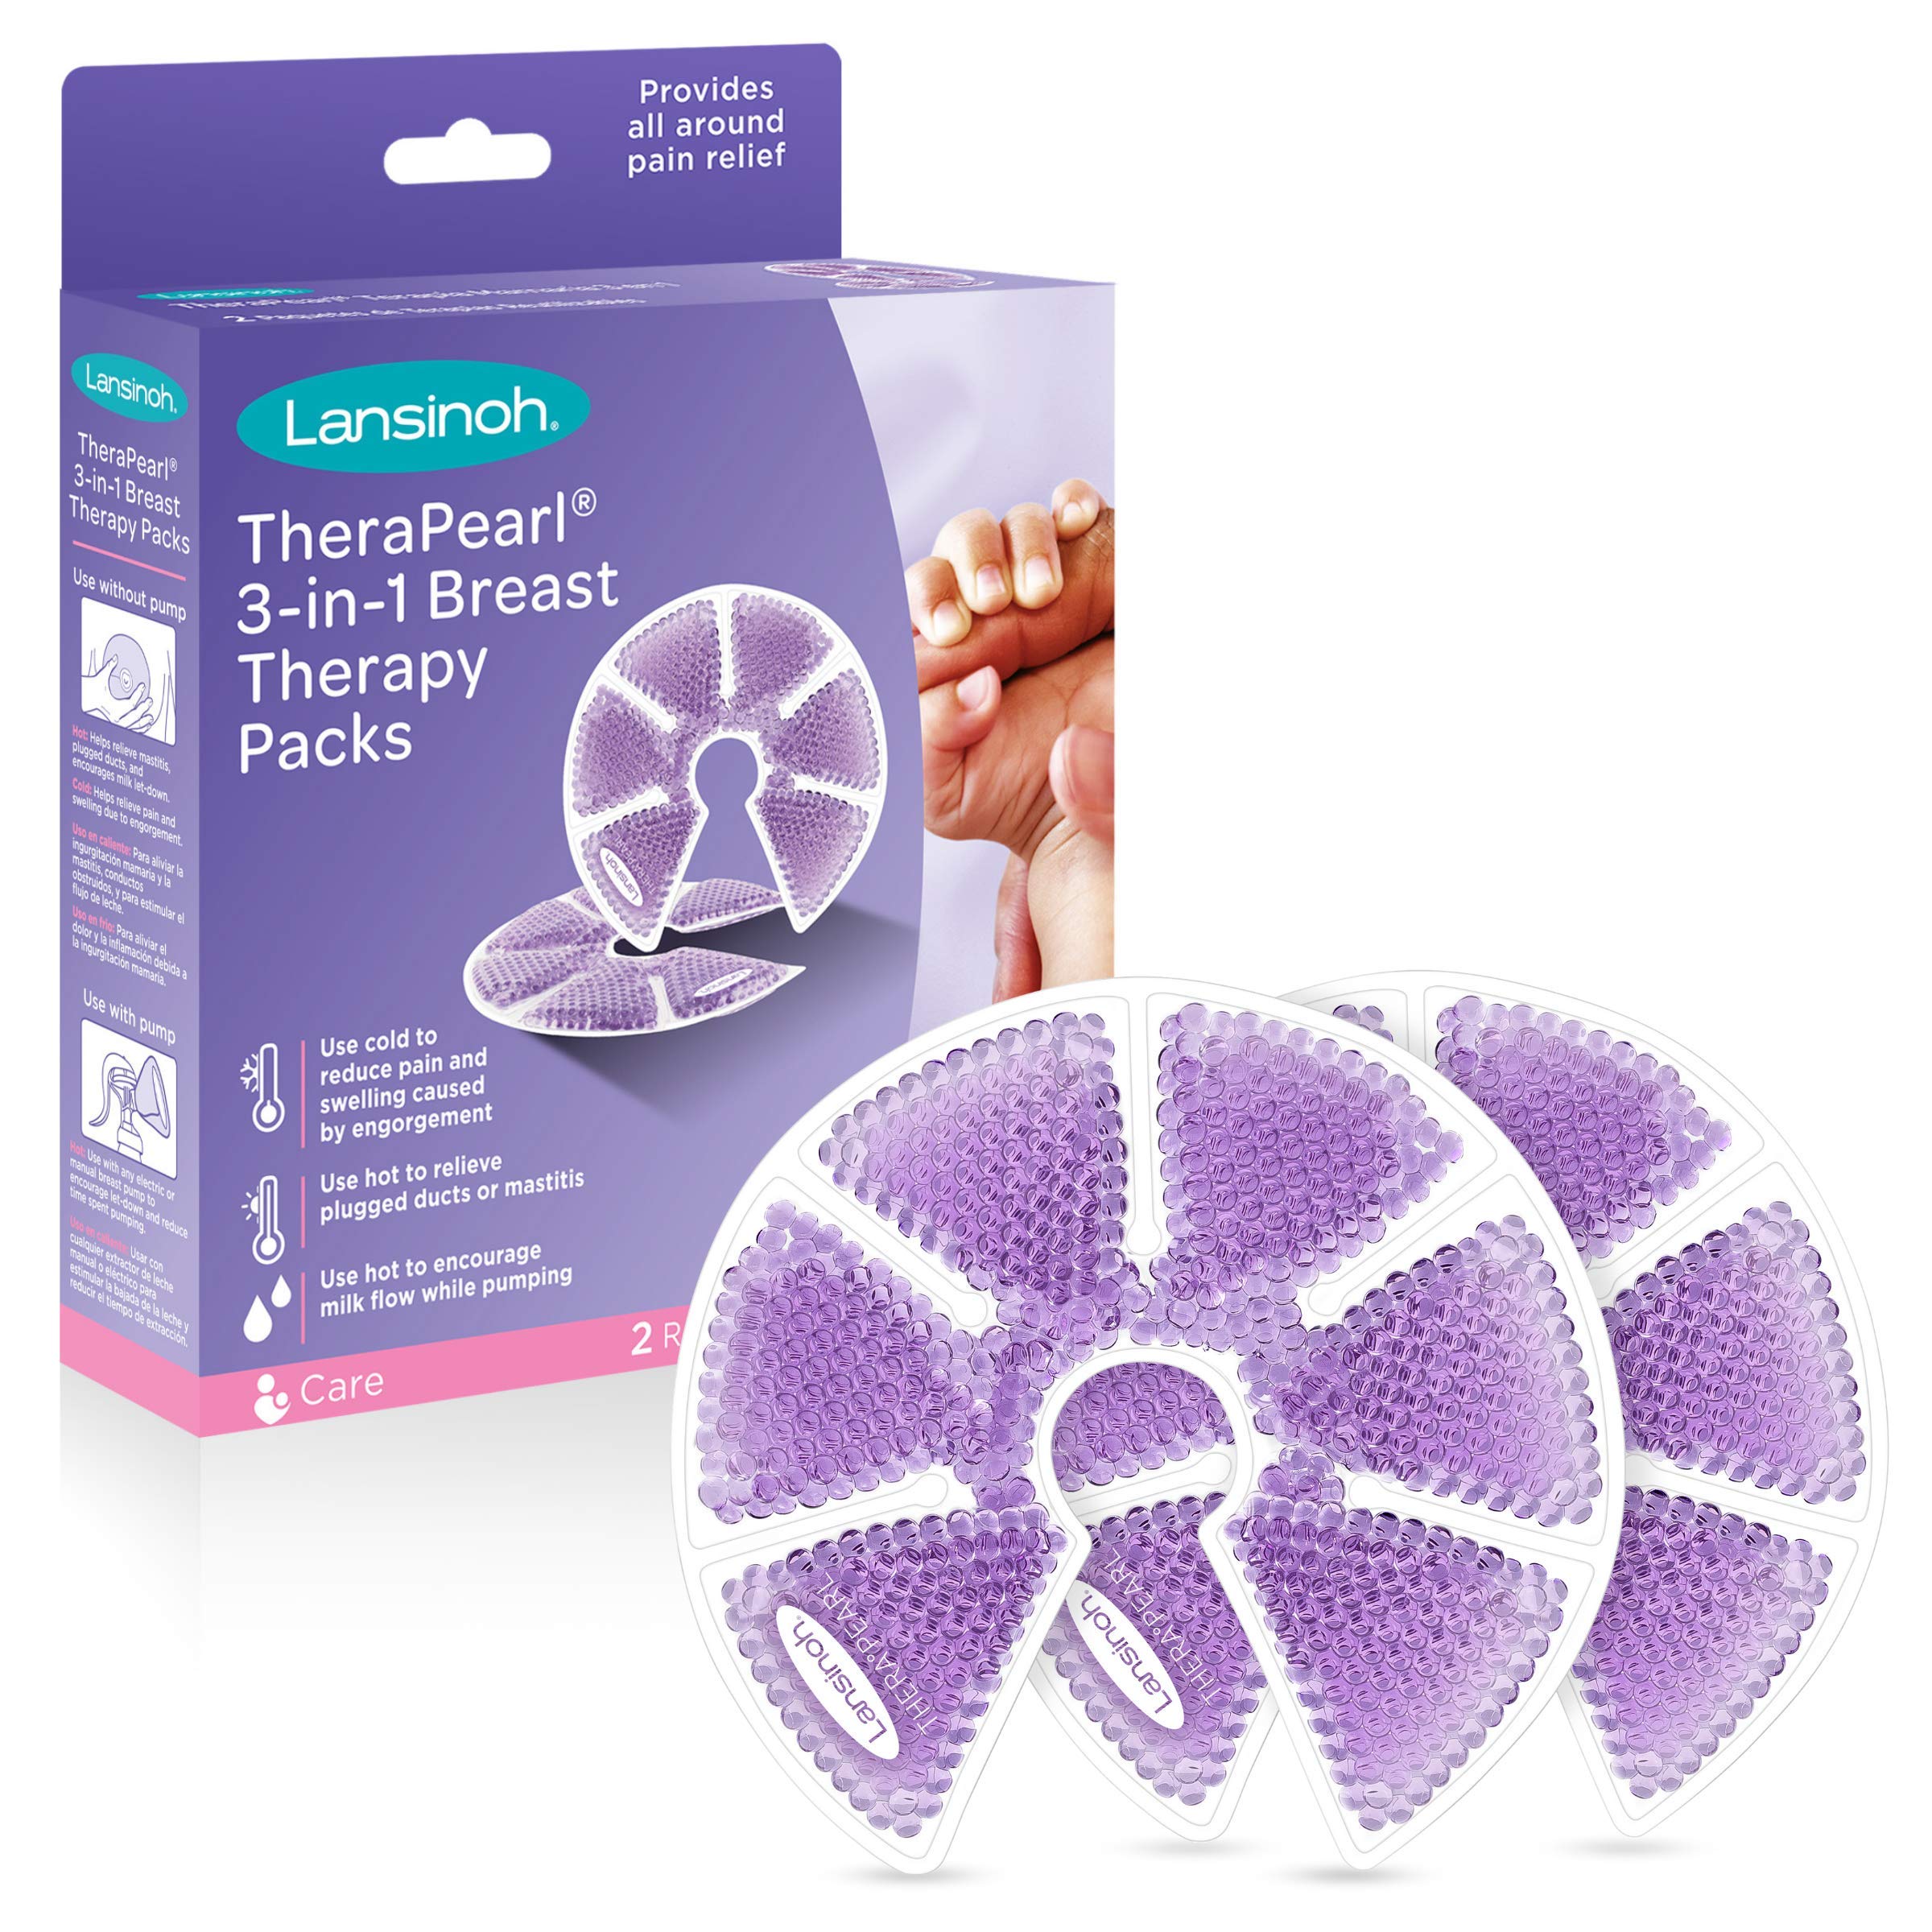 Page 1 - Reviews - Lansinoh, TheraPearl, 3-in-1 Breast Therapy, 2 Reusable  Packs and Soft Covers - iHerb